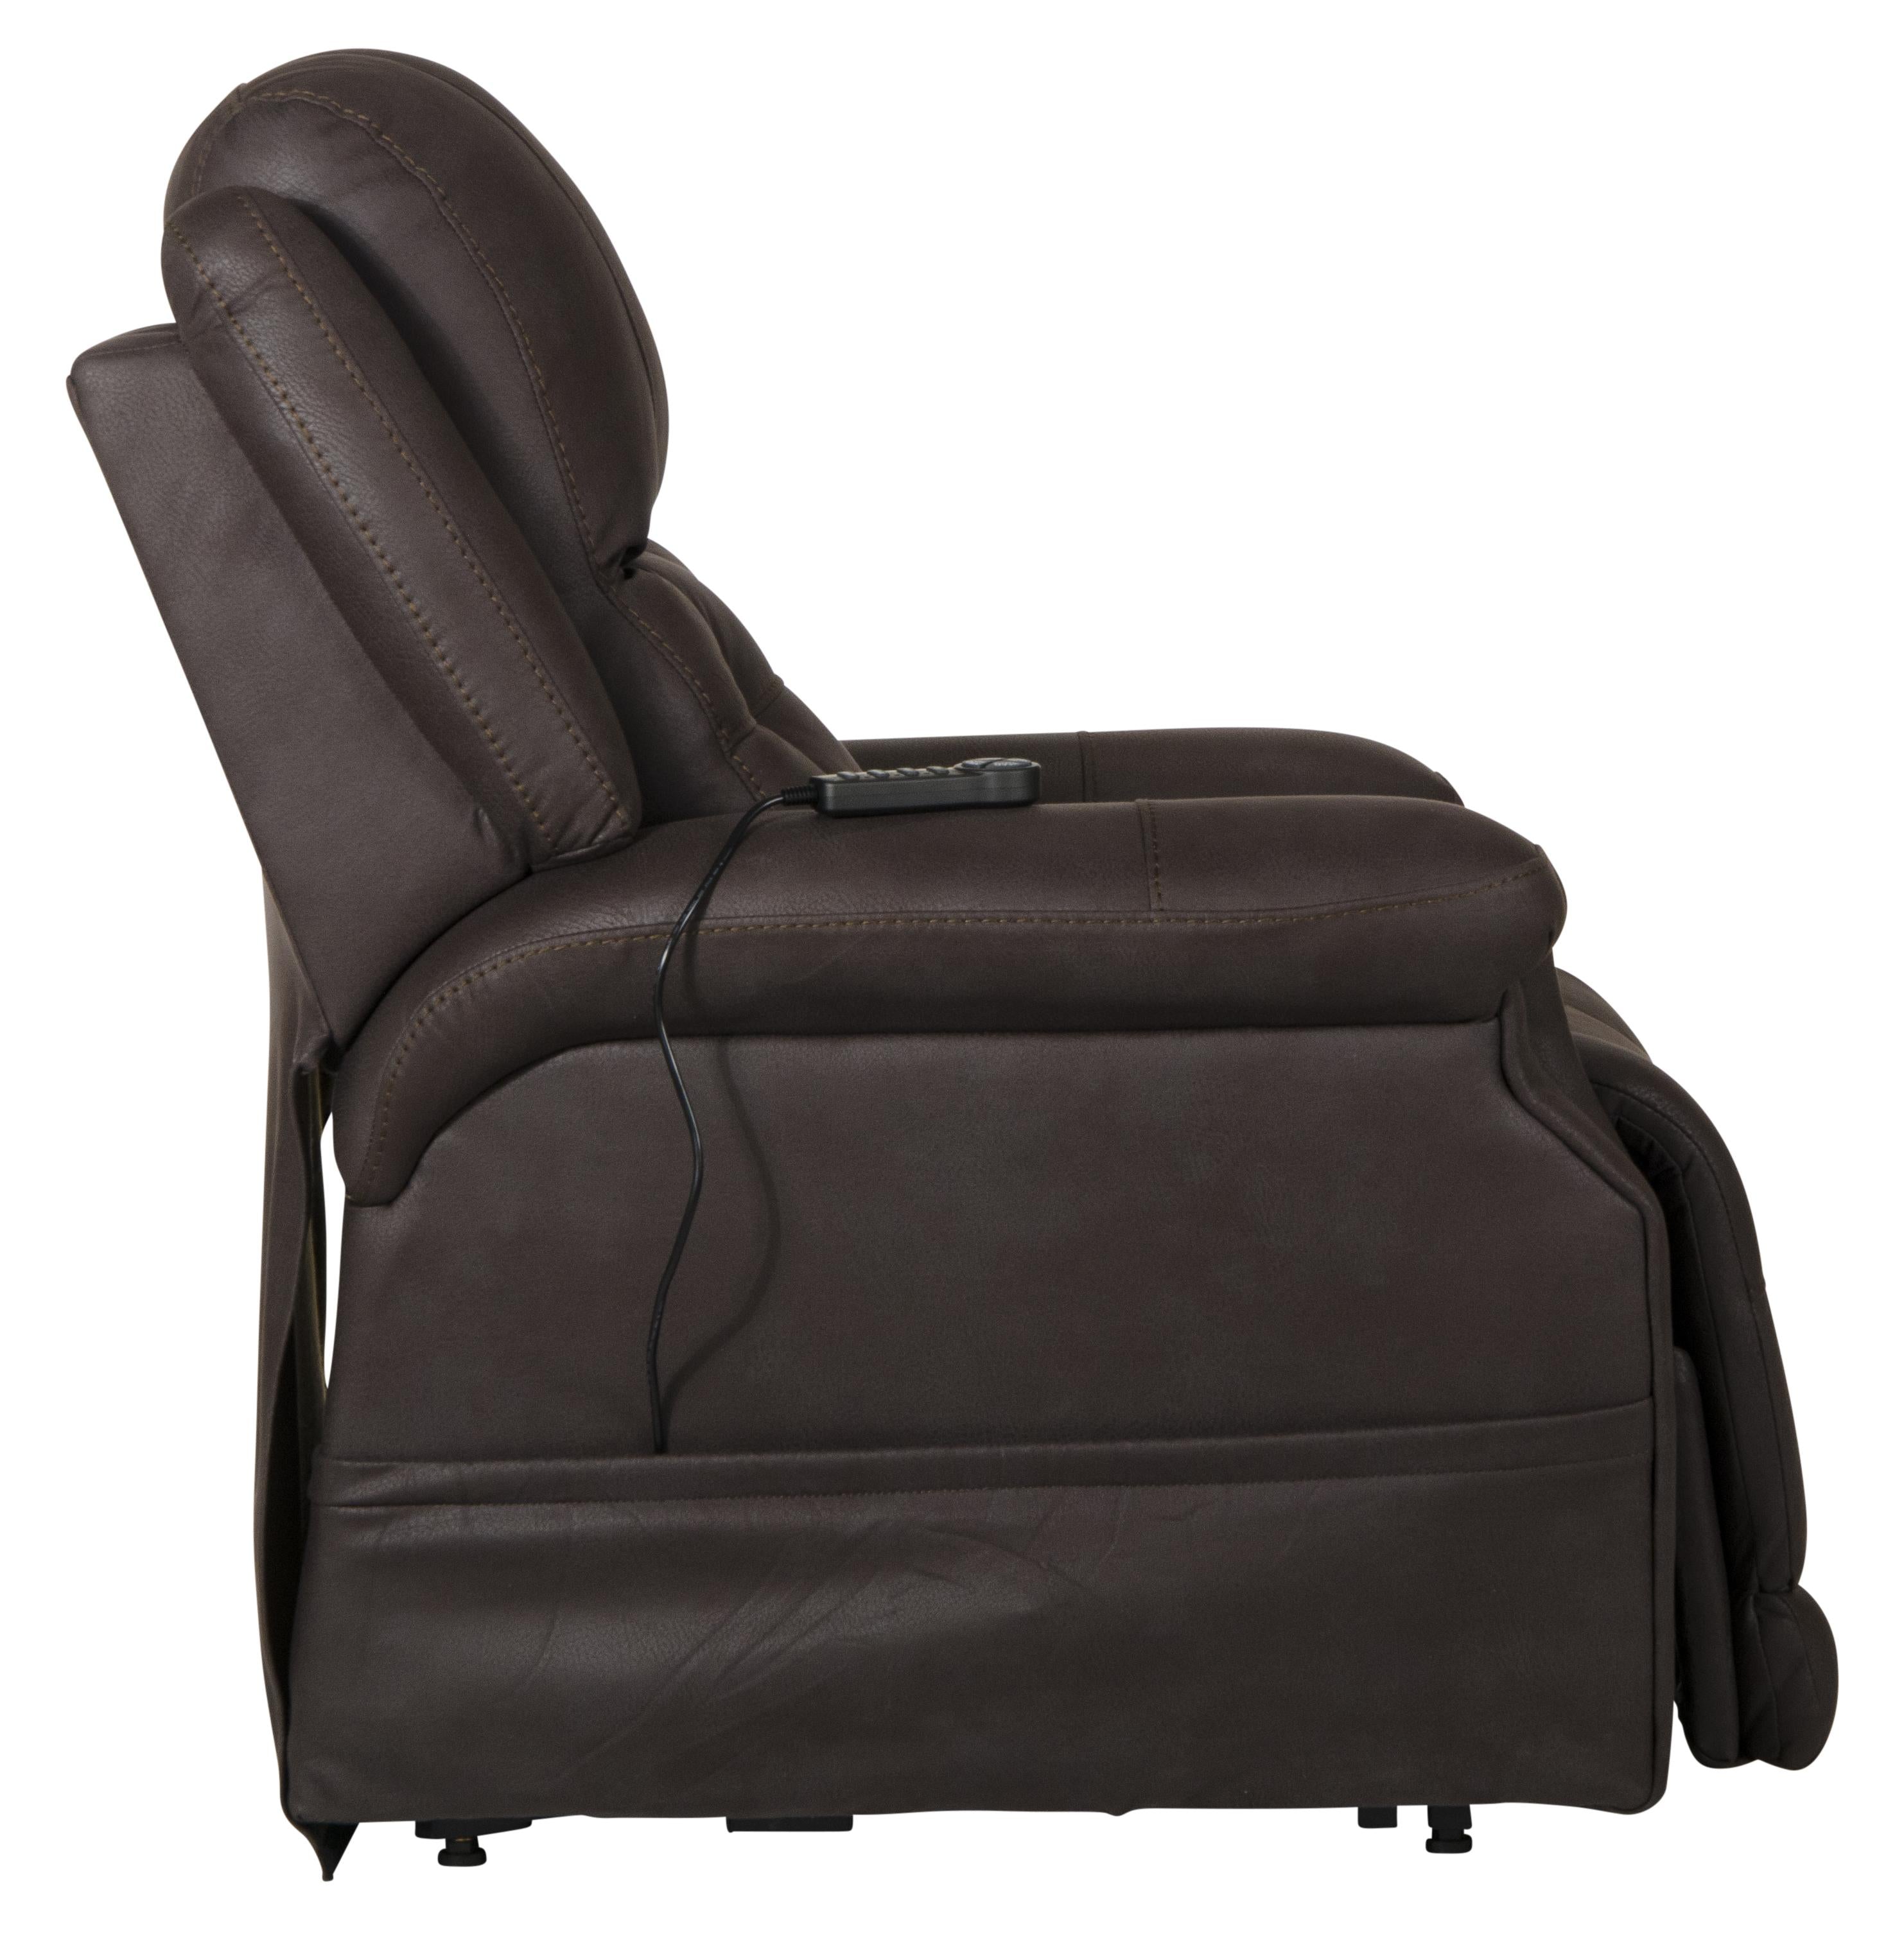 Haywood Power Lift Assist Lay Flat Recliner with Power Adjustable Headrest and Heat & Massage - Luxury Home Furniture (MI)